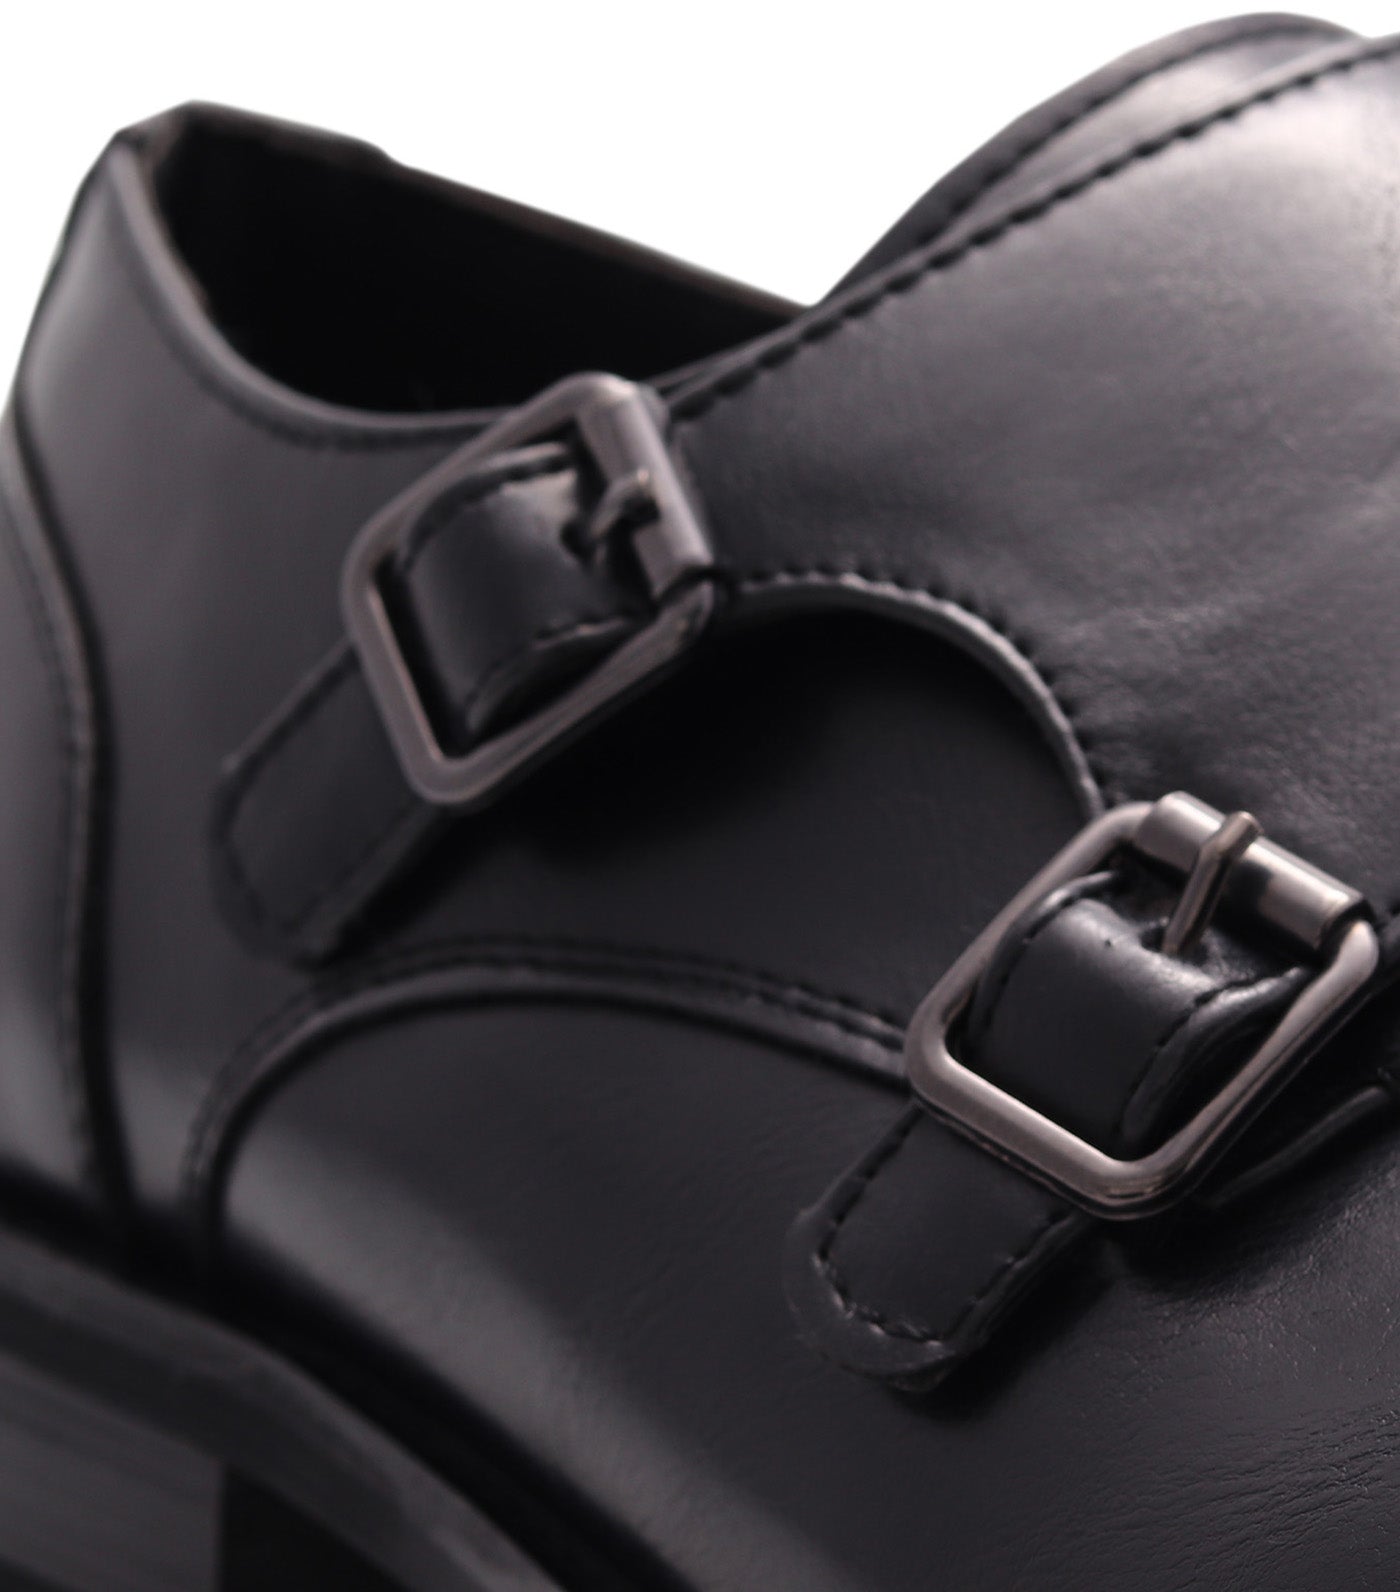 Marquee Double Monk Strap Black